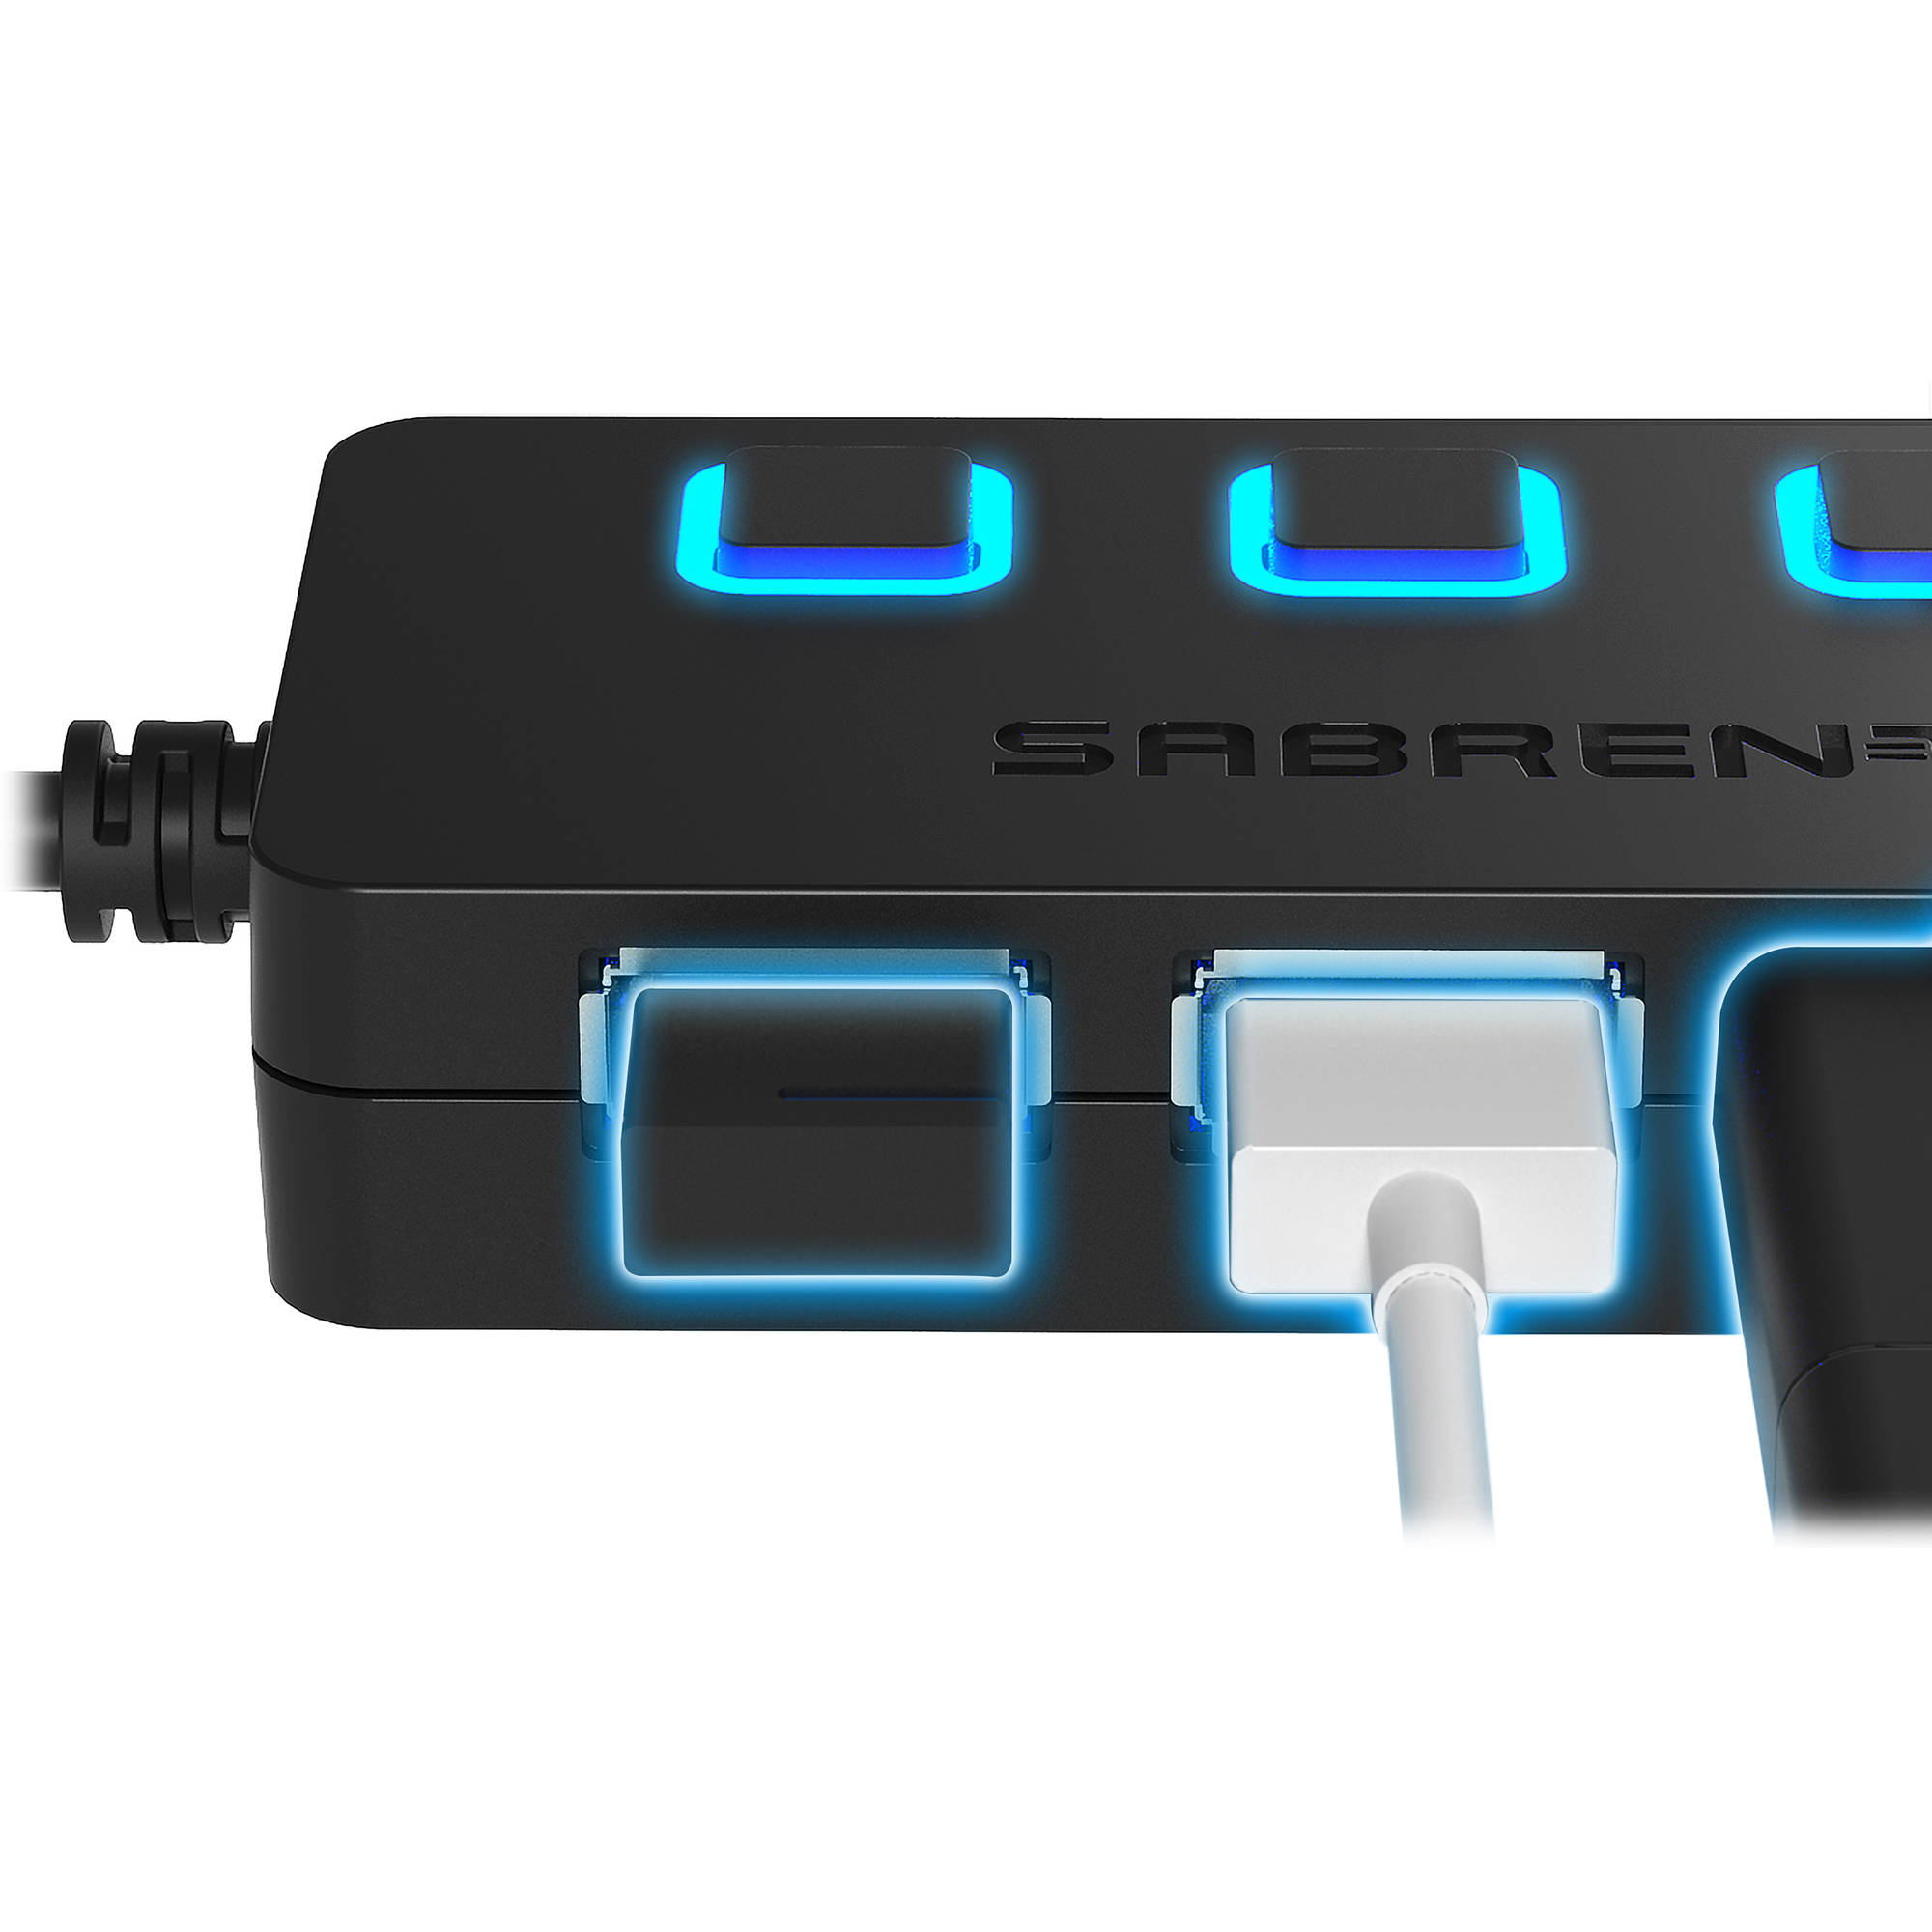 Sabrent 4 Port Usb 3 0 Hub With Power Switches Hb Um43 B H Photo